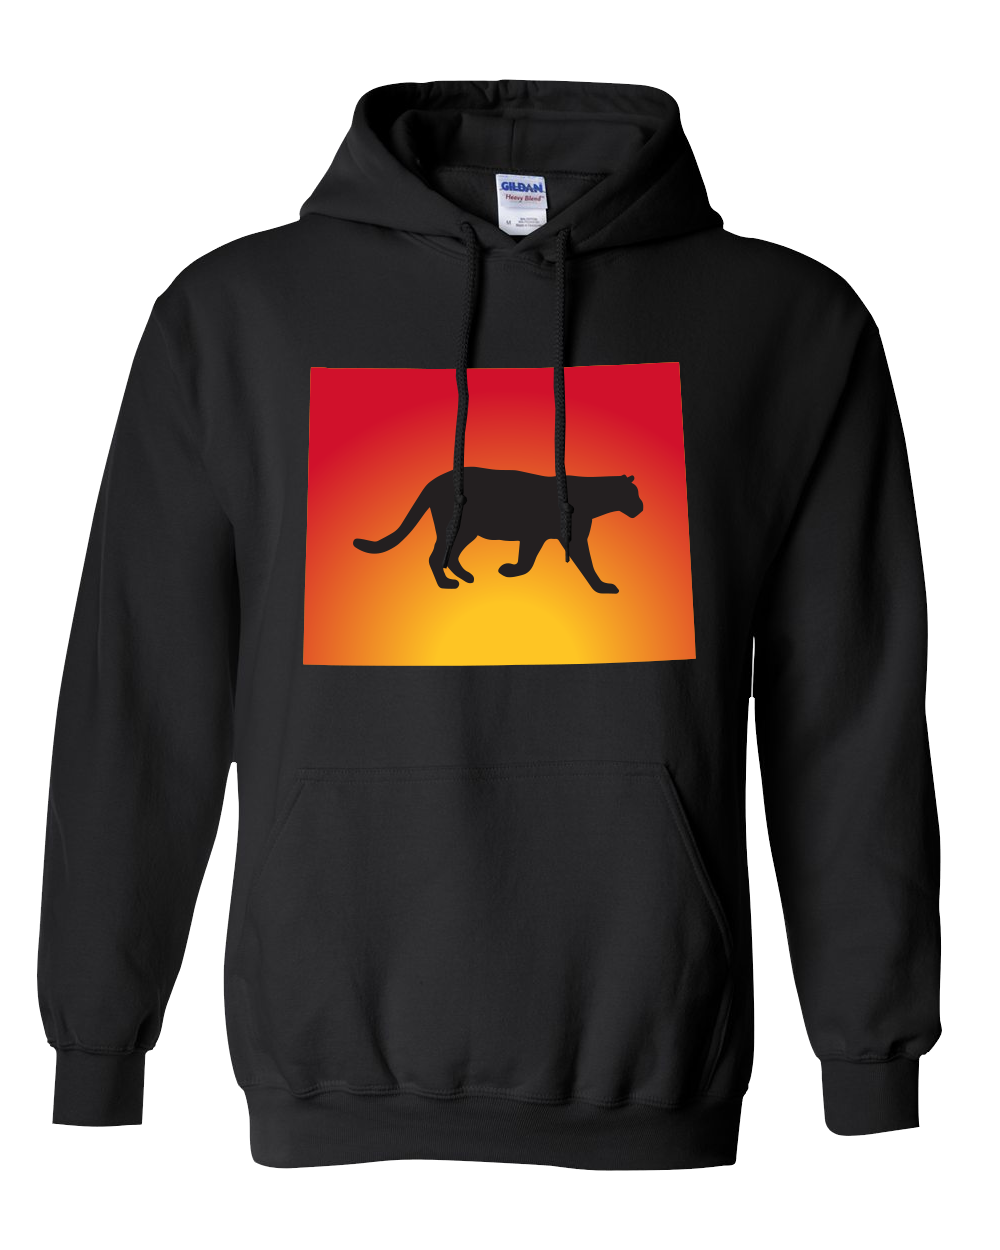 Pullover Hooded Sweatshirt Wyoming Black Mountain Lion Vibrant Design High Quality Tight Knit Ring Spun Low Maintenance Cotton Printed With The Newest Available Color Transfer Technology